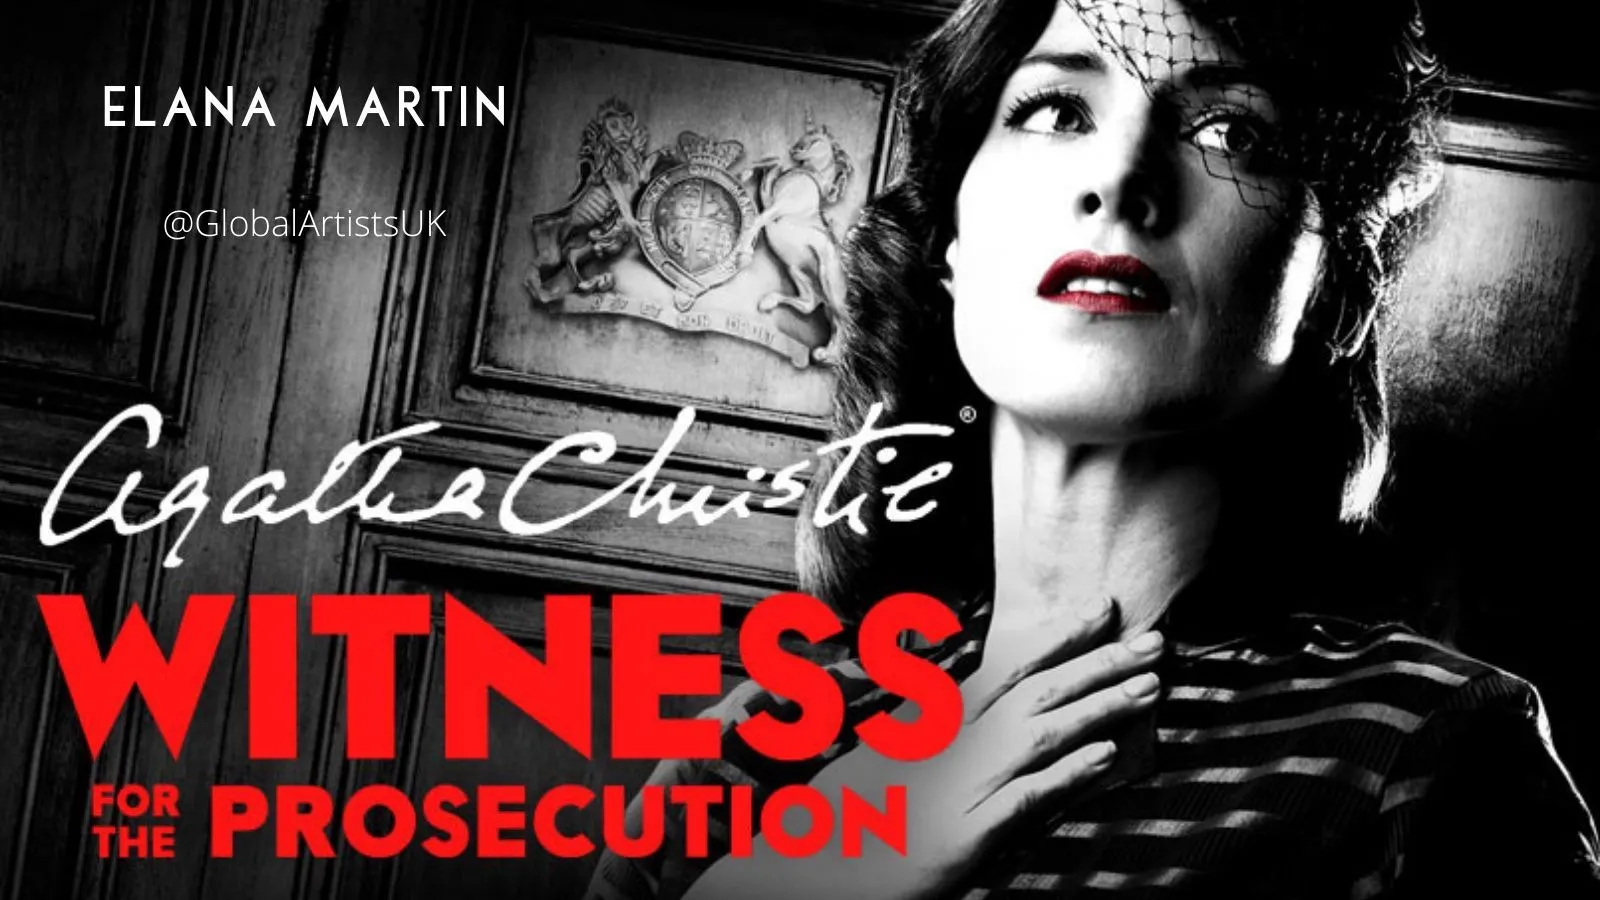 Experience this unique courtroom setting in the gripping story of Leonard Vole. Buy Witness for the Prosecution London tickets.